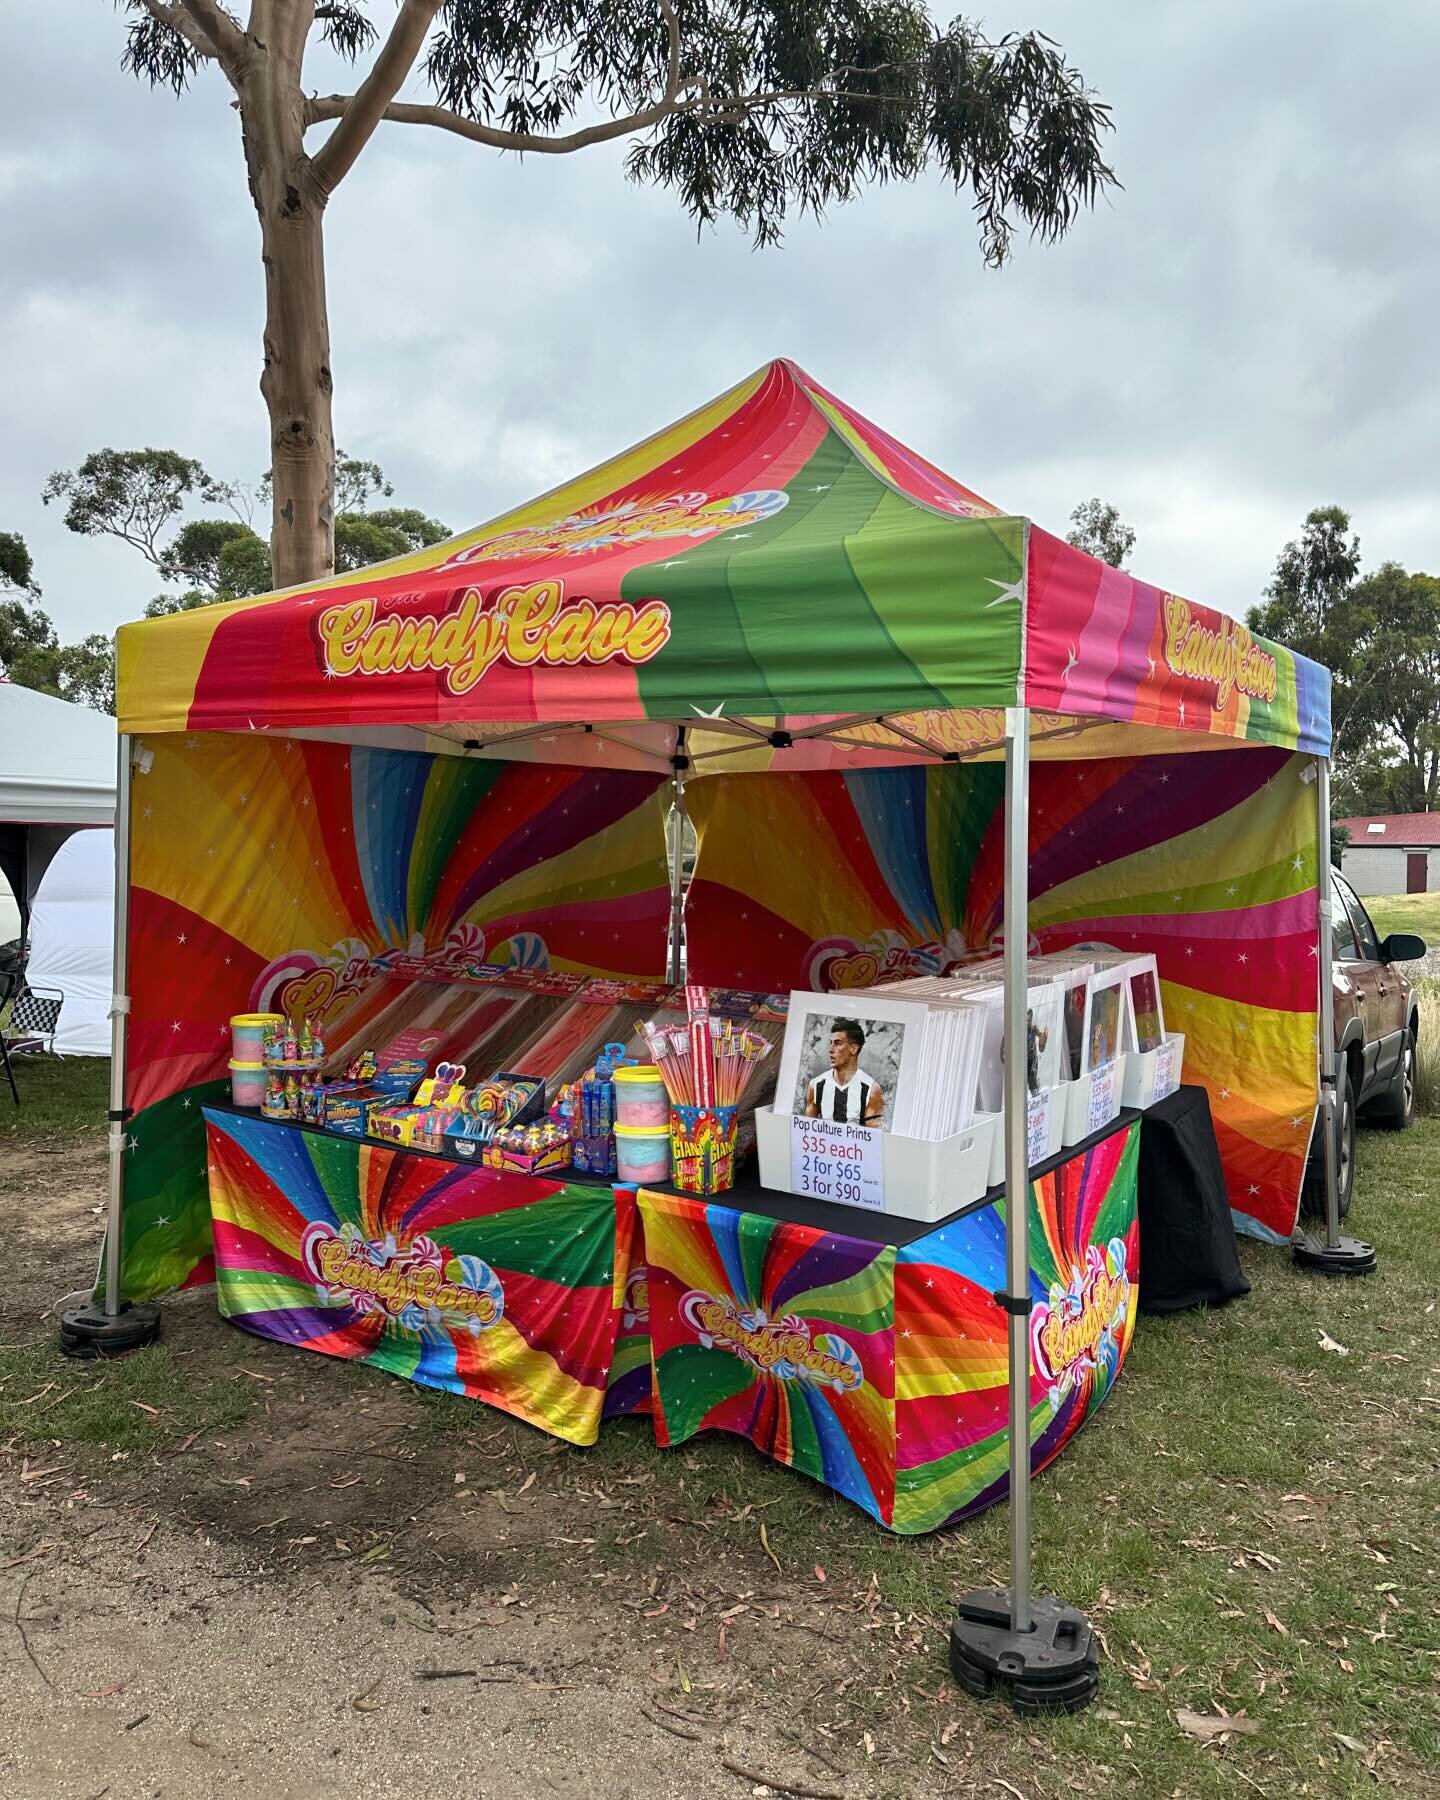 We&rsquo;re trading at Wallan Market today - Hadfield Park Wallan VIC #wallan #marketsvic #candystall #melbourneeats #melbournemarkets #lollyshop #foryoupage